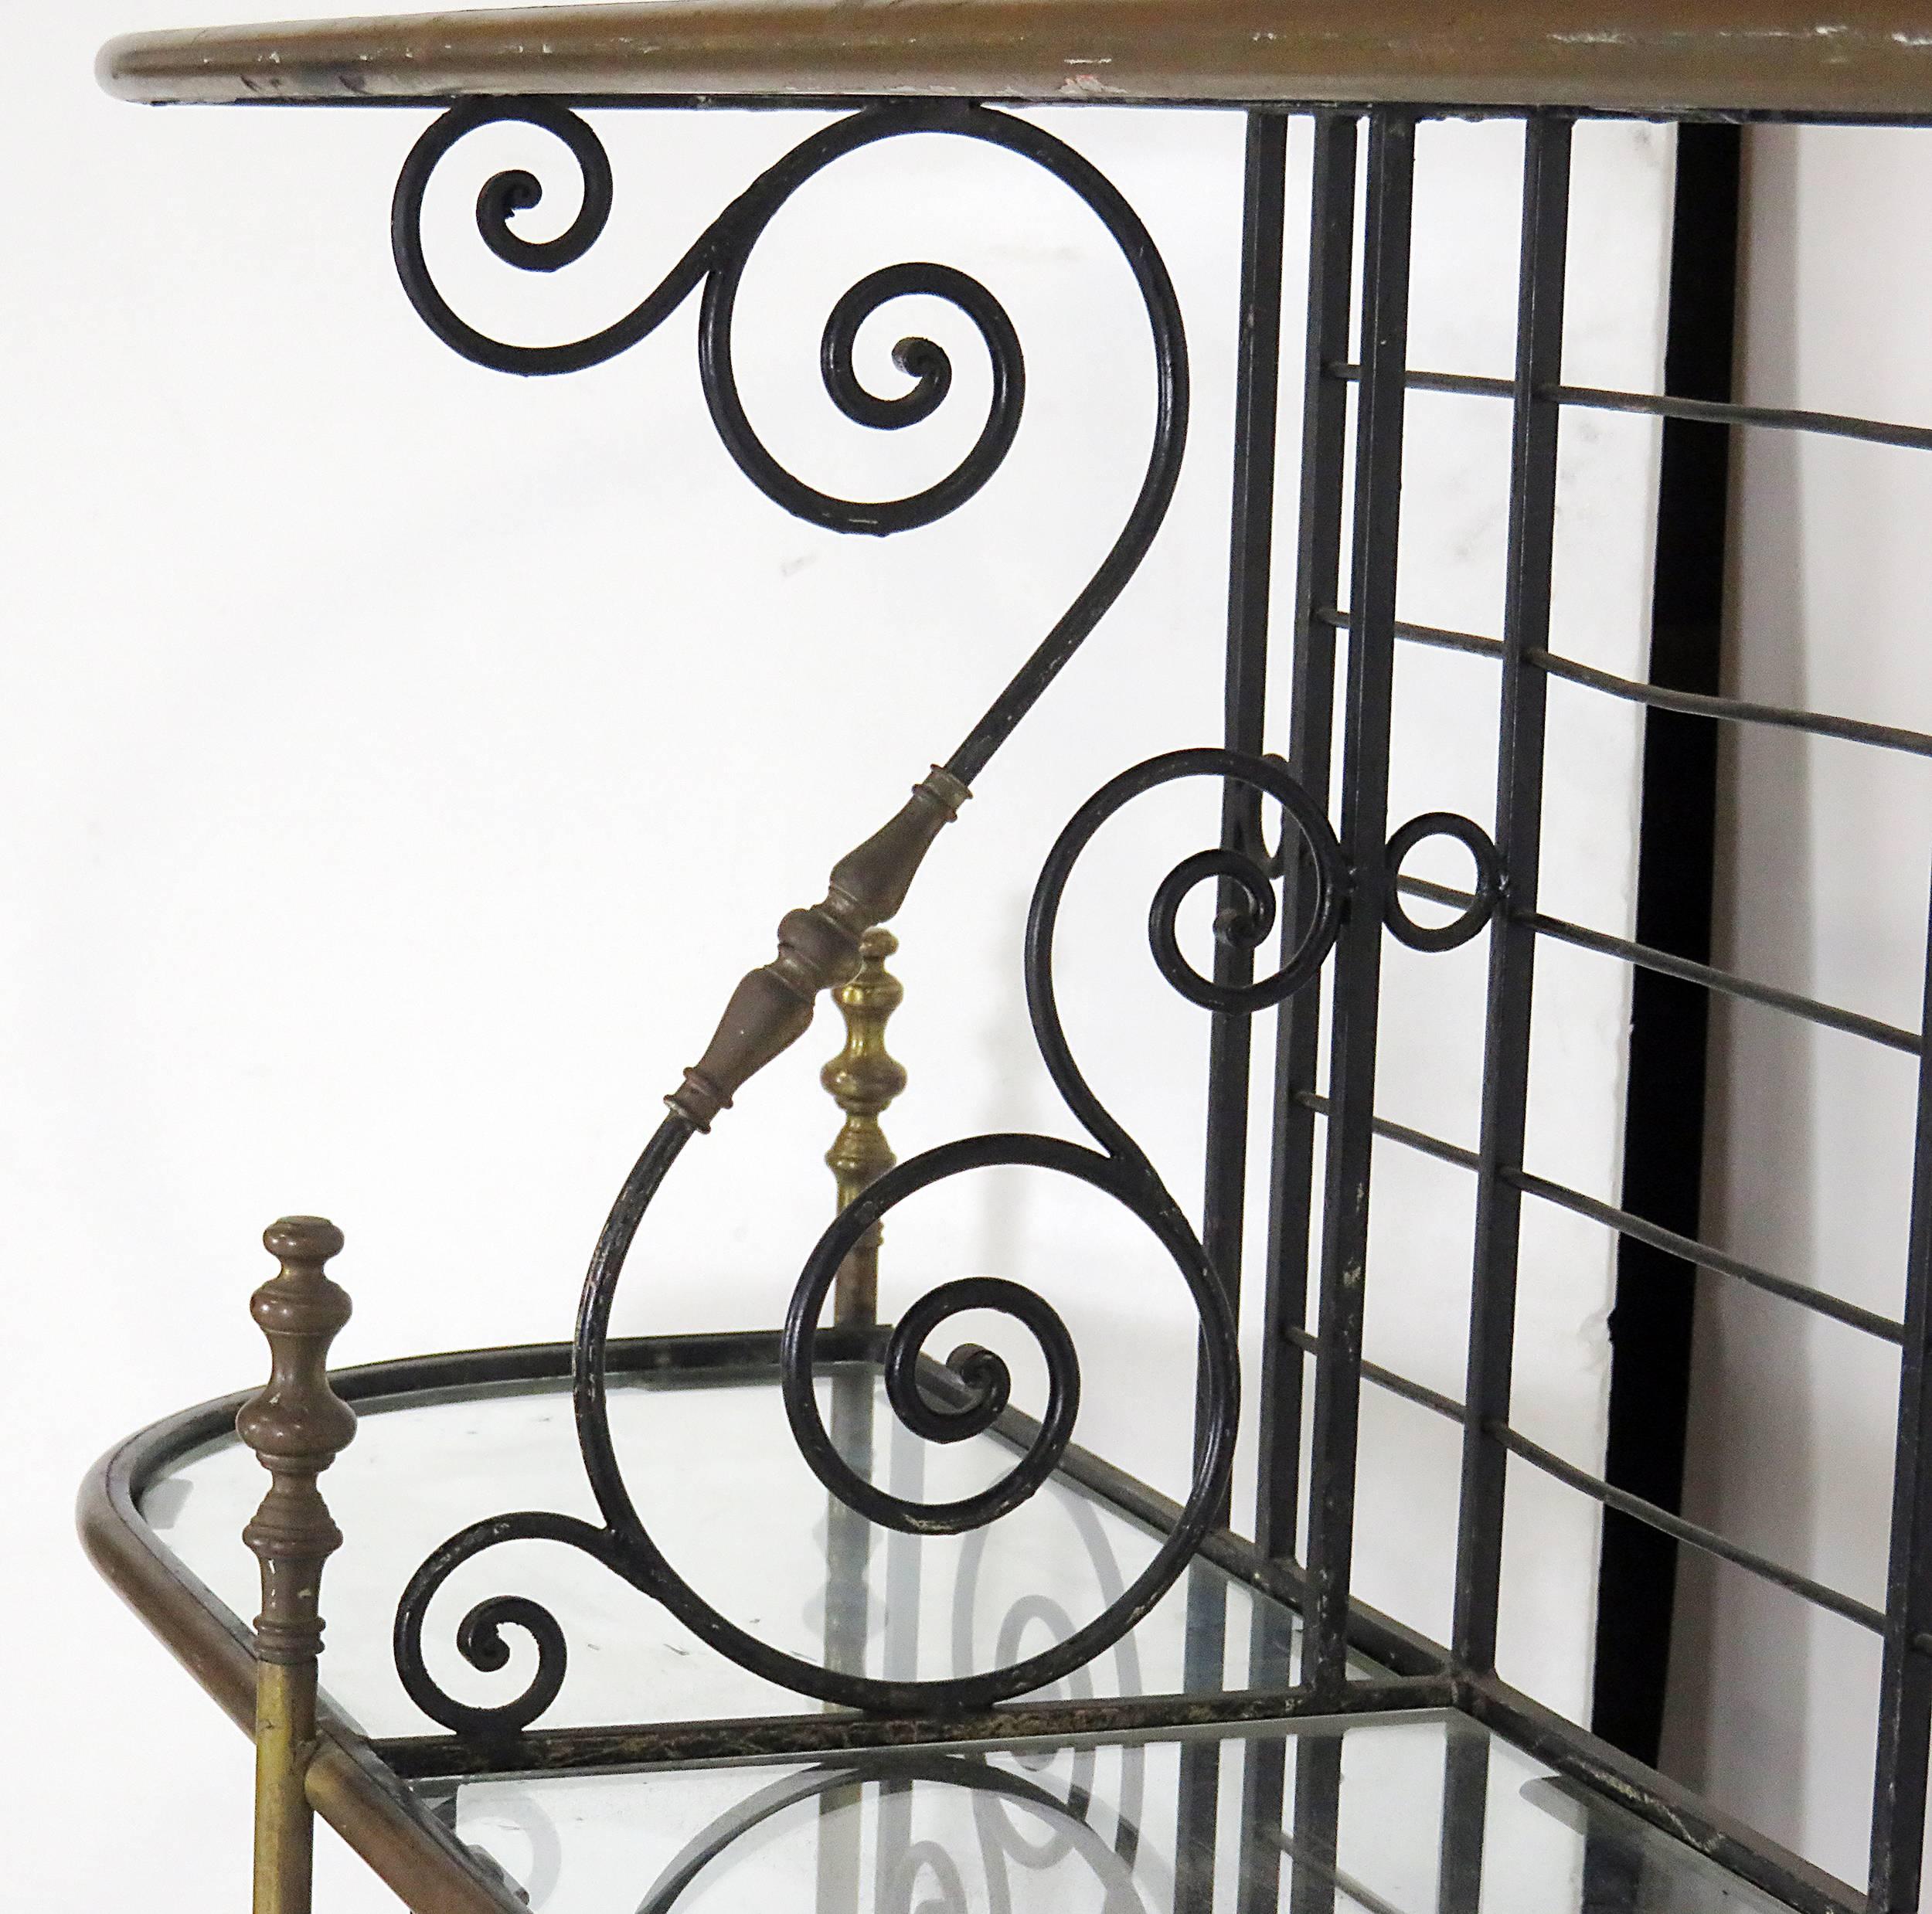 An early 20th century French Baker's rack, circa 1910. A large, decorative and useful piece. Great storage.